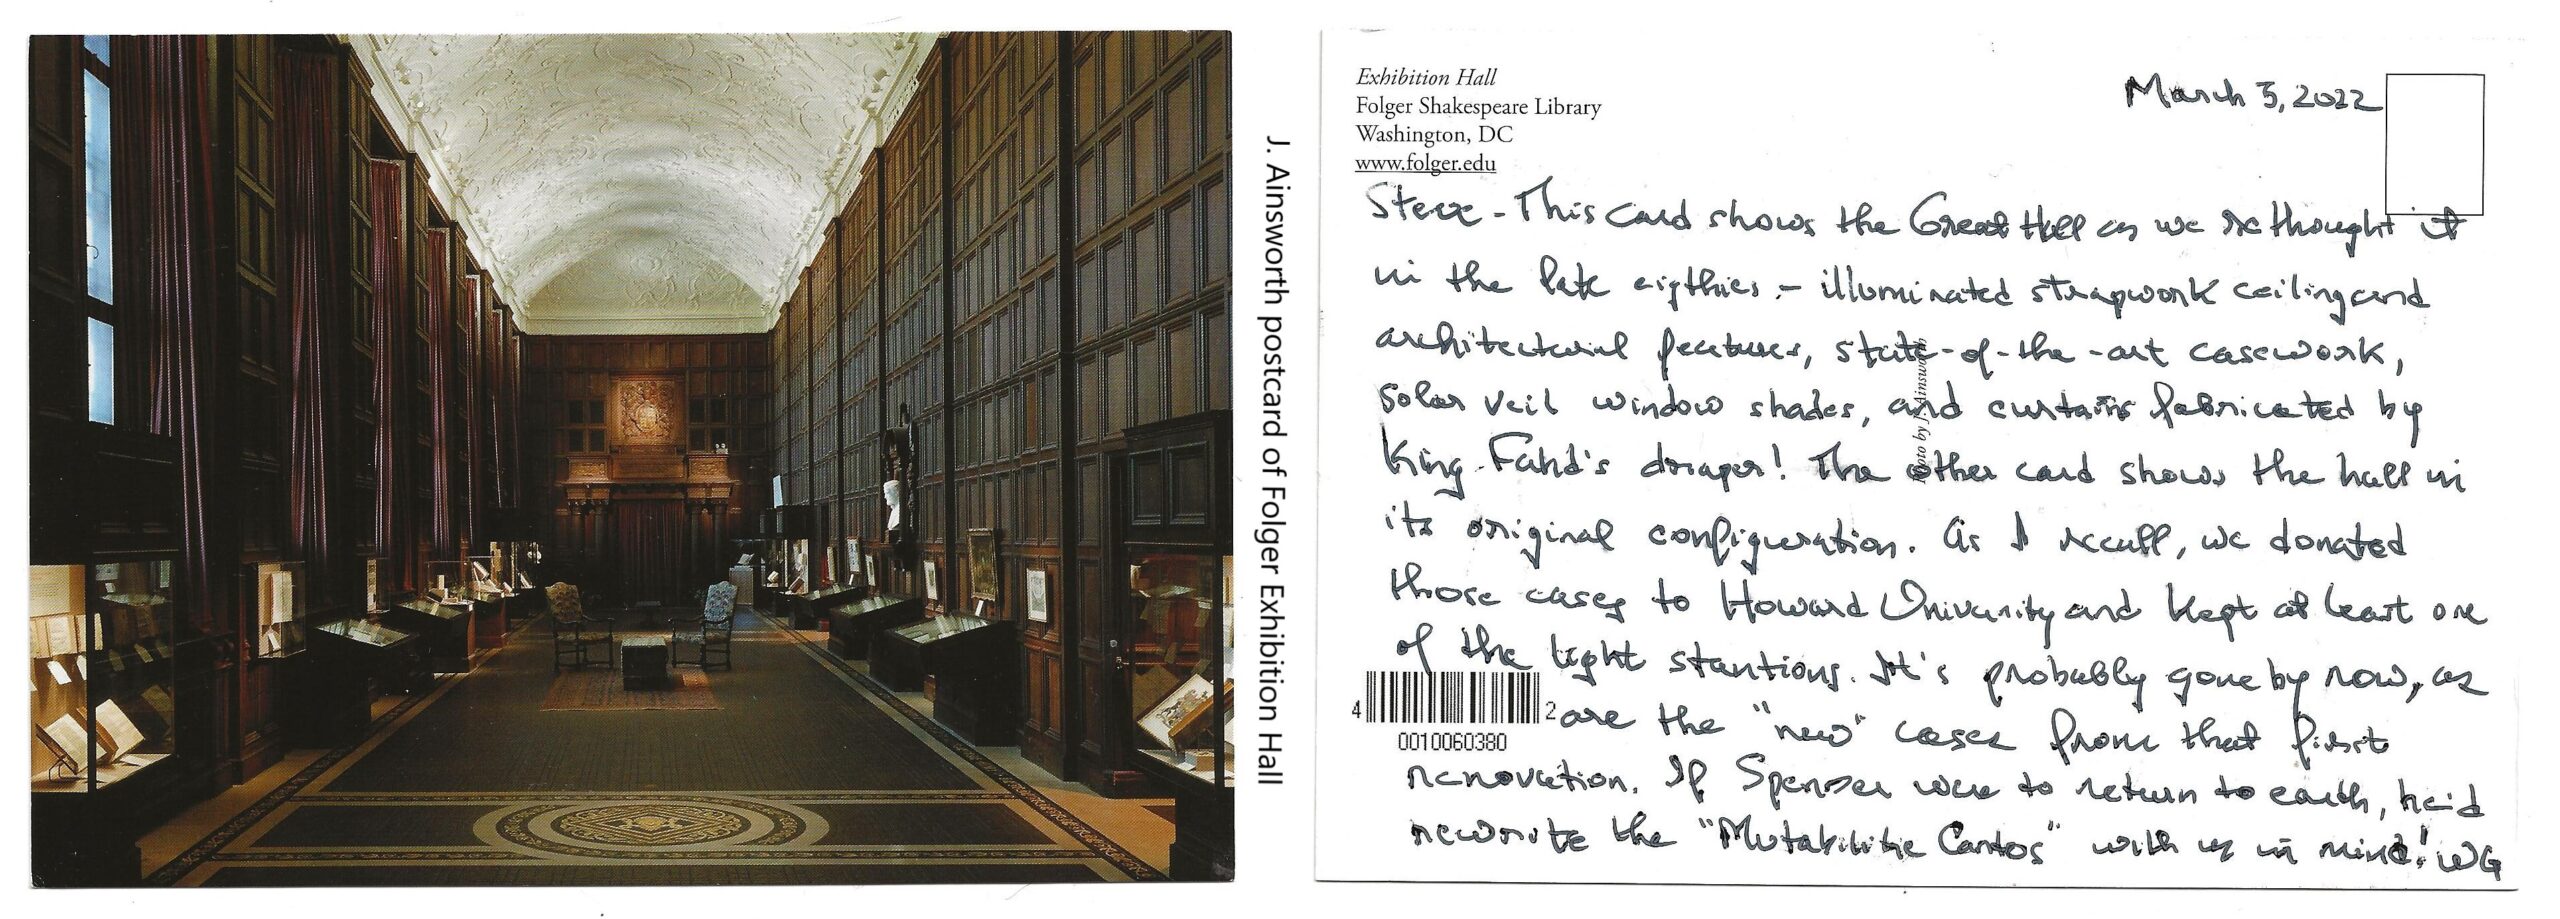 a composite image of two sides of a postcard, one side with a image of the Great Hall at the Folger and the other with a handwritten note